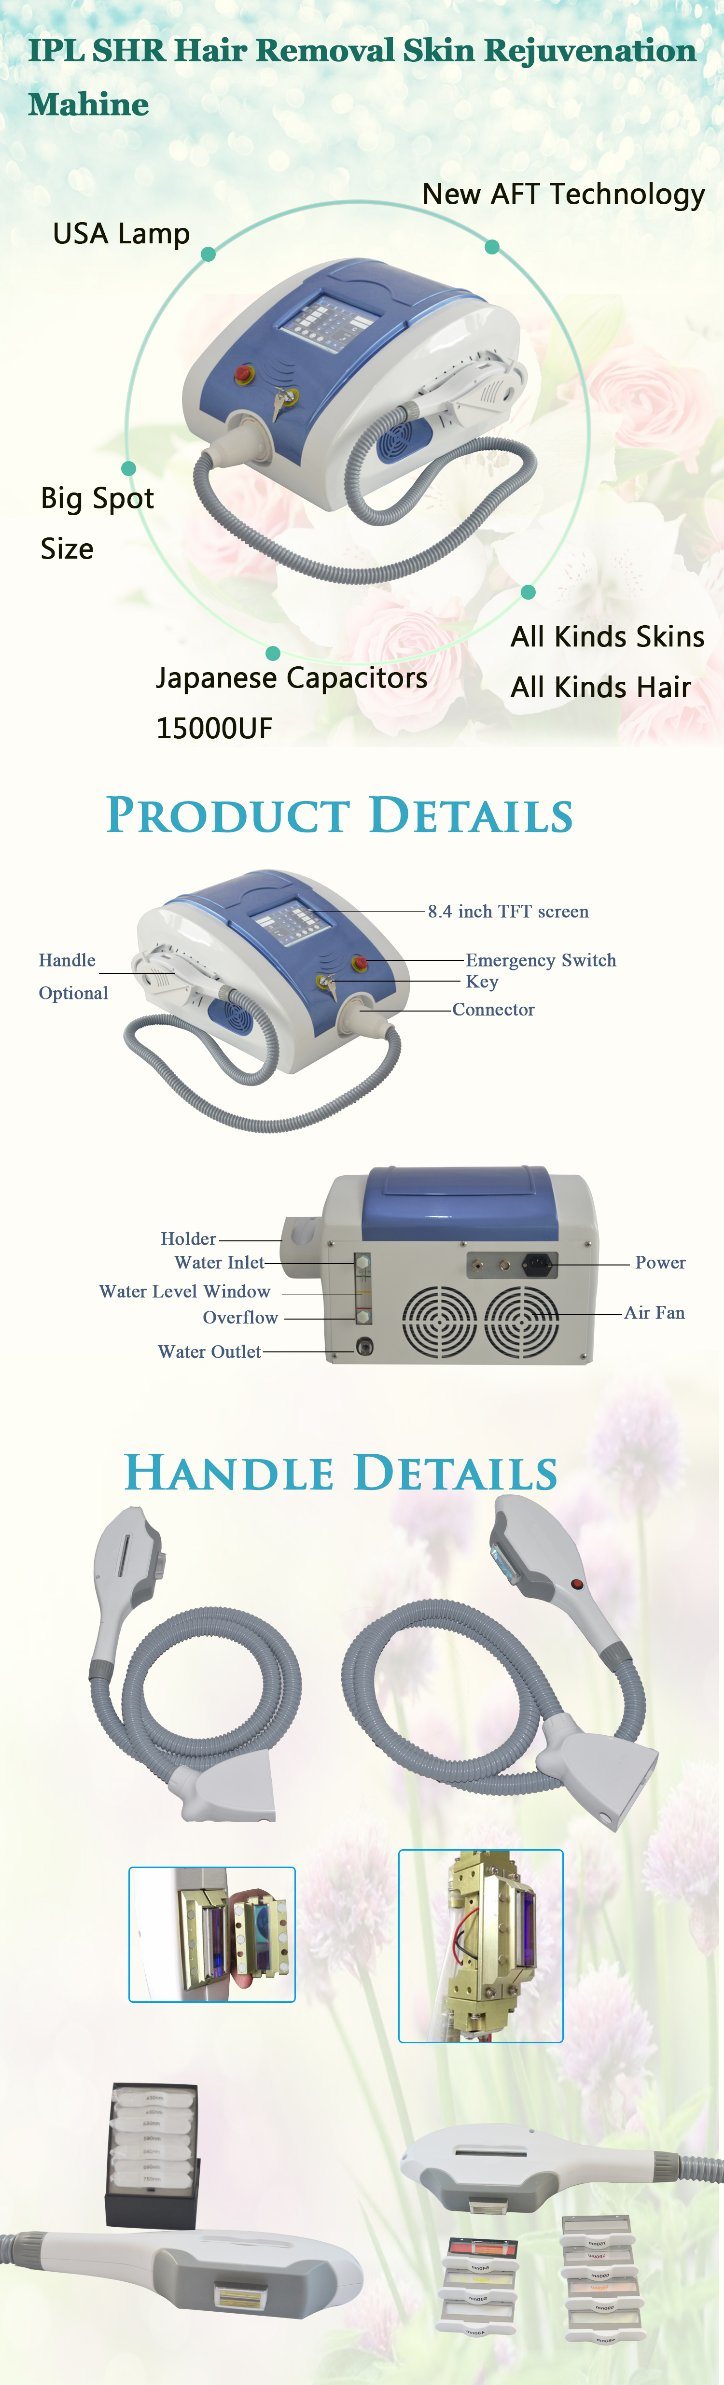 Portable IPL Shr Hair Removal Machine with Low Price